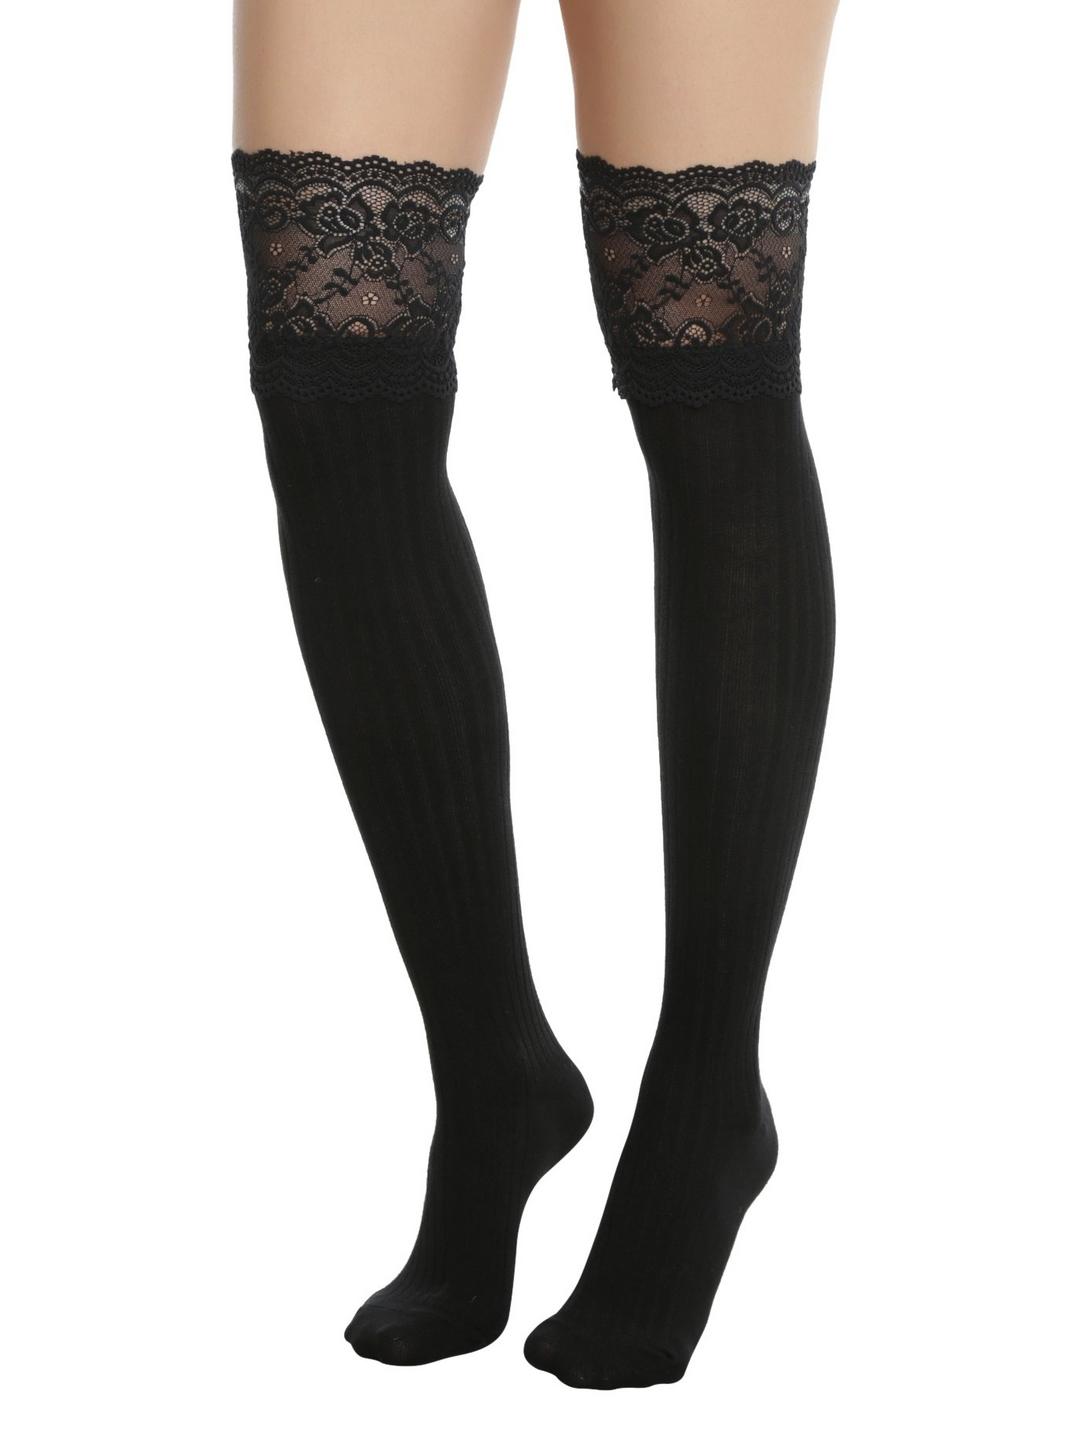 Blackheart Black Lace Cuff Ribbed Over-The-Knee Socks | Hot Topic